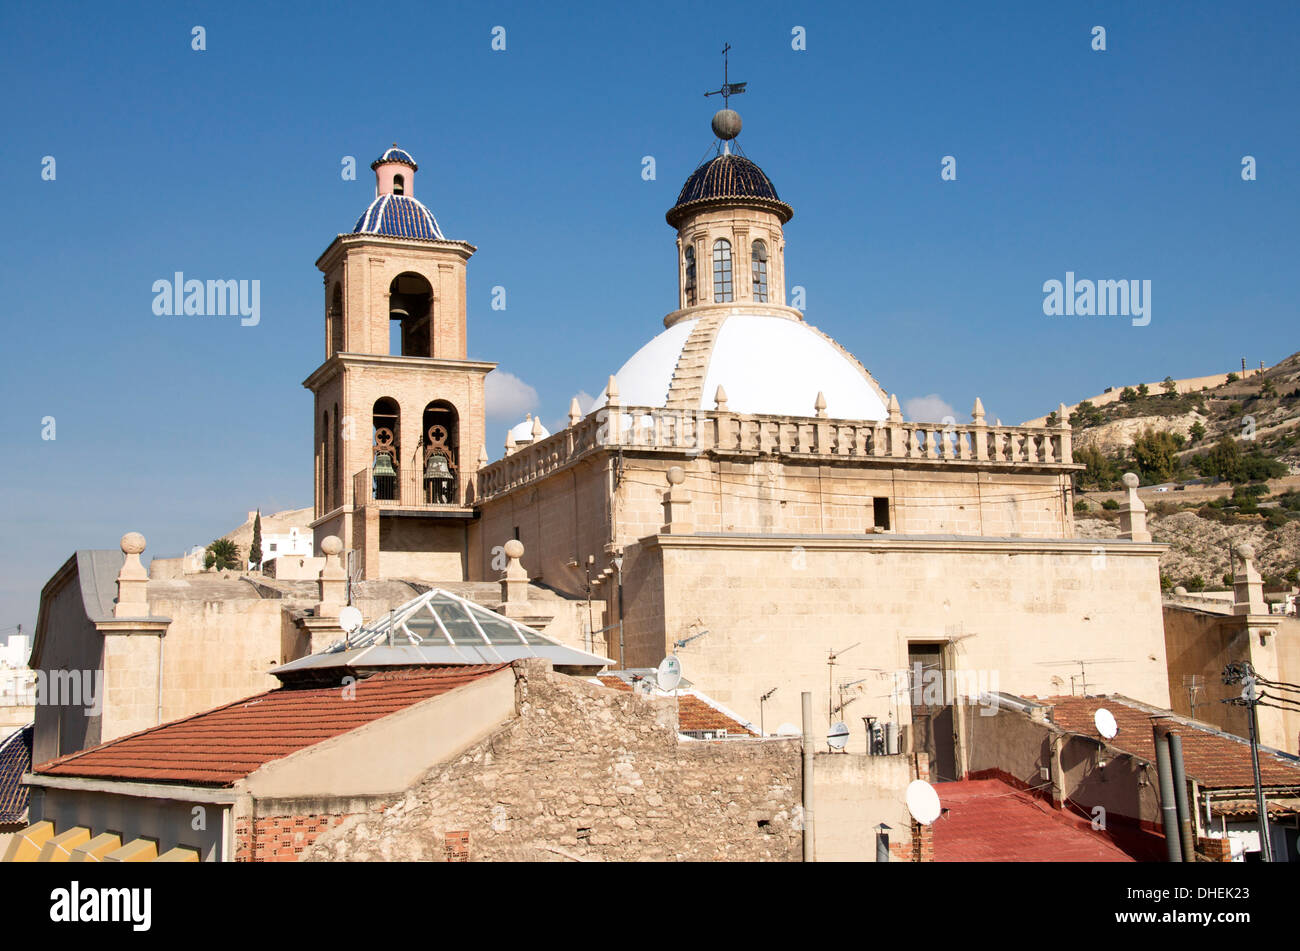 View of the town roofs and cathedral San Nicola de Bari, Alicante, Valencia province, Spain, Europe Stock Photo